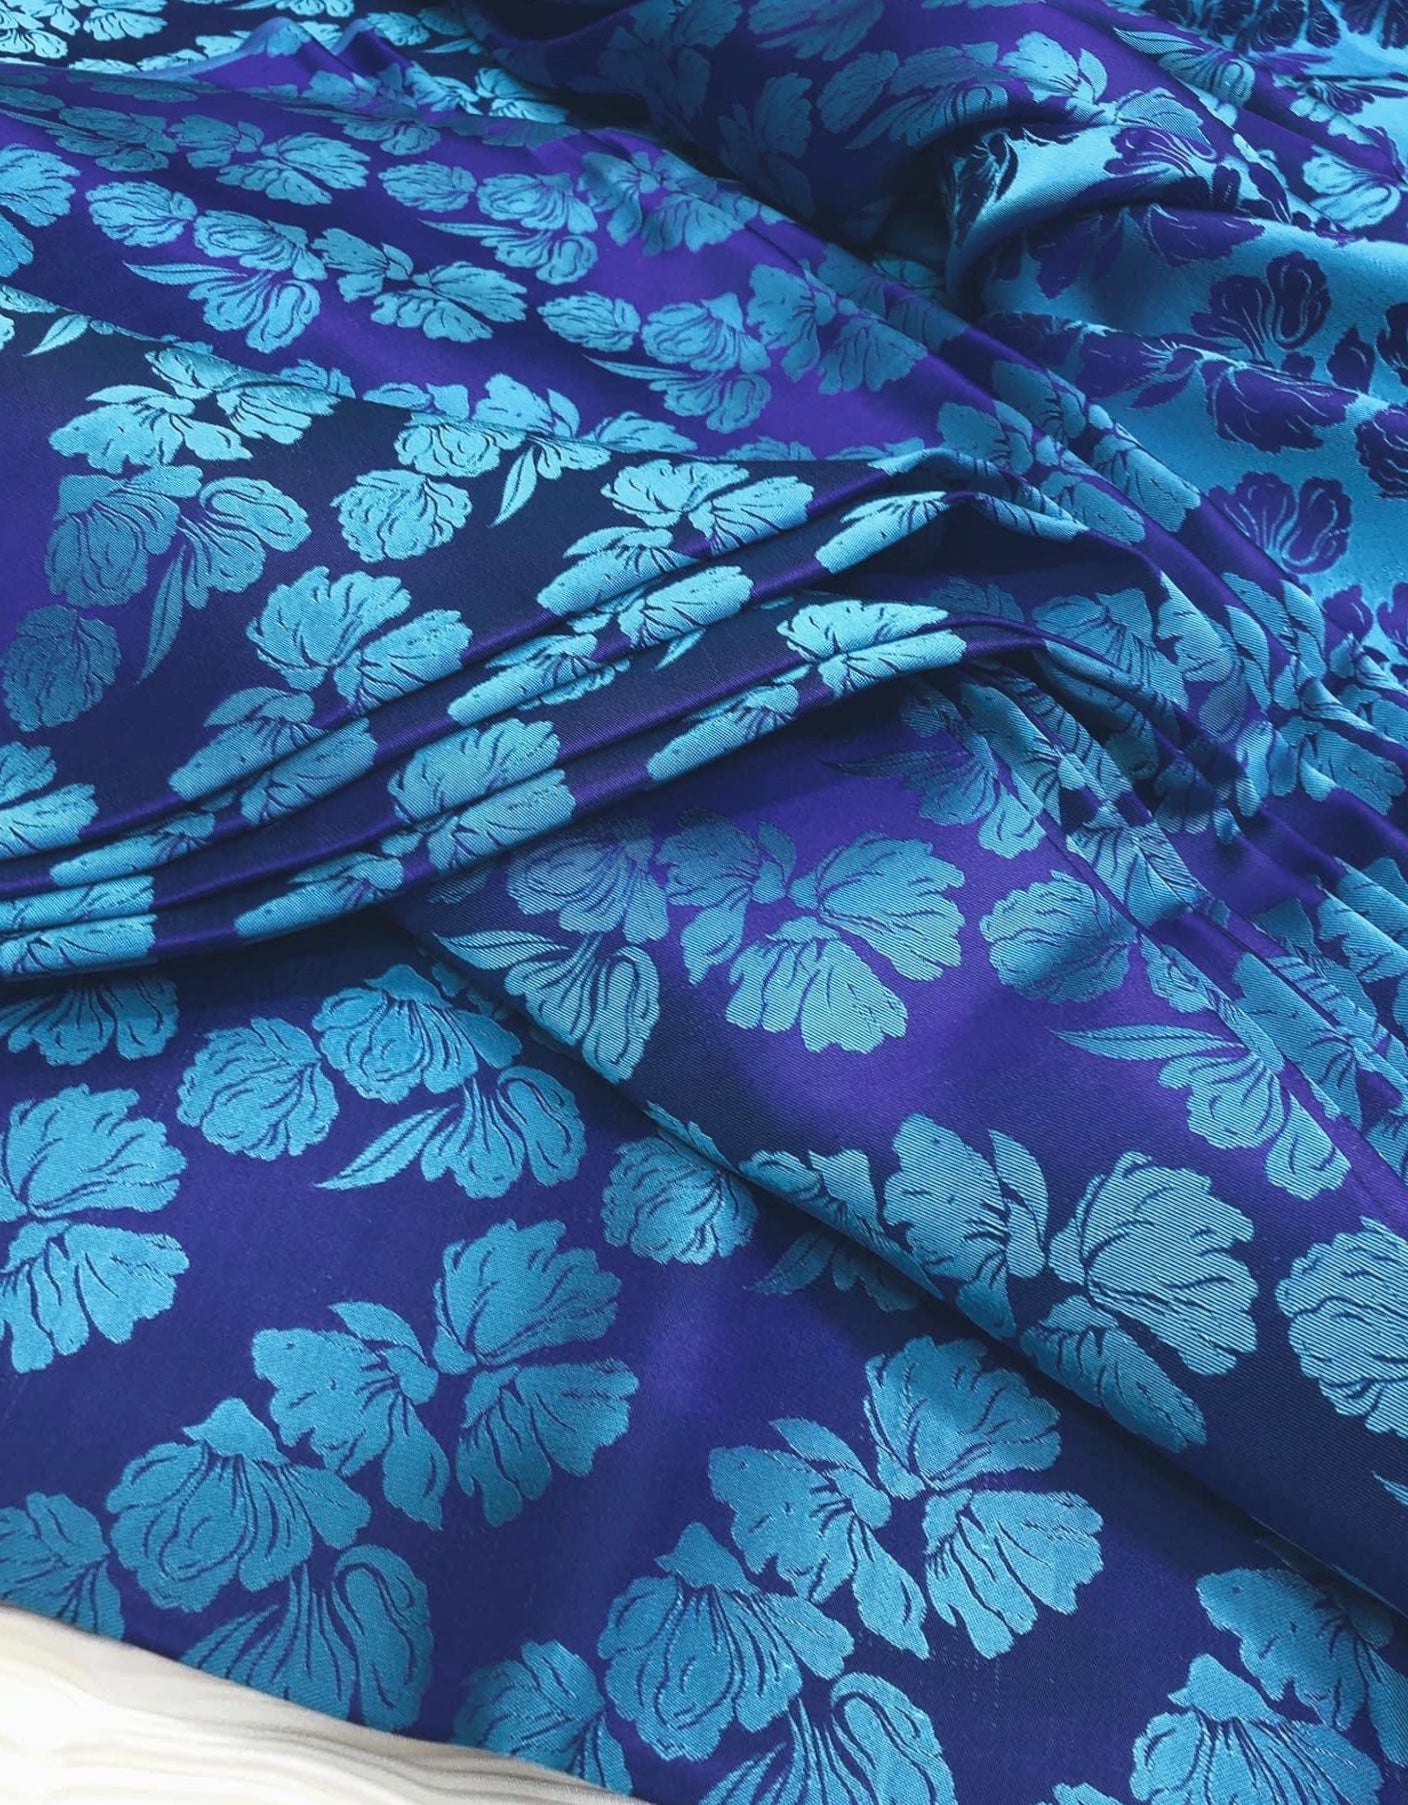 Blue silk with Flowers - PURE MULBERRY SILK fabric by the yard -  Floral Silk -Luxury Silk - Natural silk - Handmade in VietNam- Silk with Design